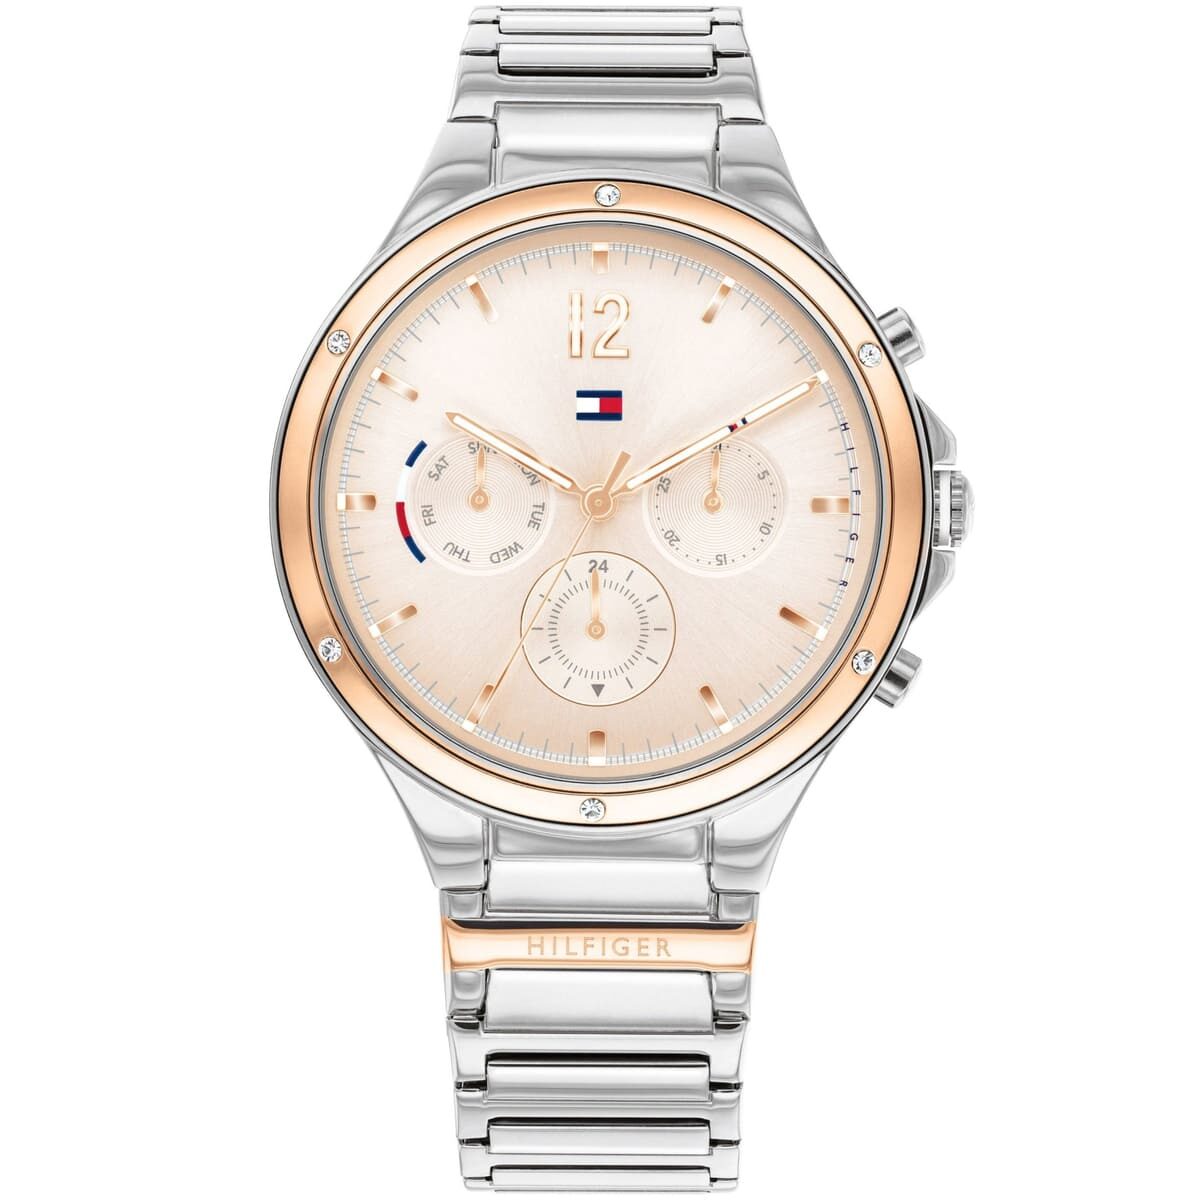 1782279-tommy-hilfiger-watch-women-rose-gold-dial-stainless-steel-metal-silver-strap-quartz-analog-day-date-month-eve